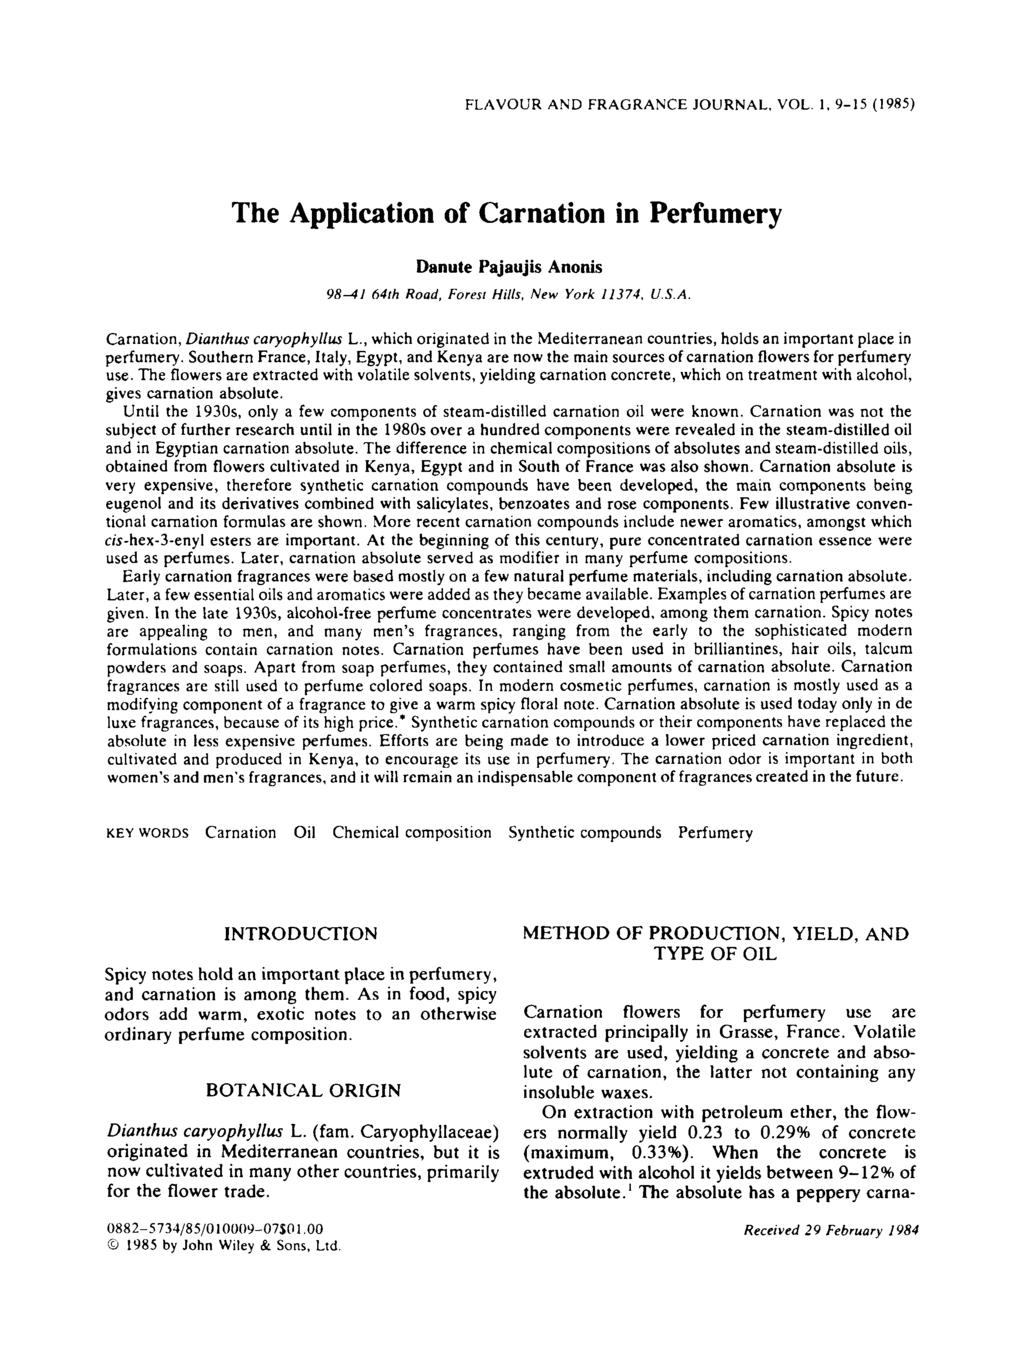 FLAVOUR AND FRAGRANCE JOURNAL, VOL. 1. 9-15 (1985) The Application of Carnation in Perfumery Danute Pajaujis Anonis 9841 64th Road, Forest Hills, New York 11374. U.S.A. Carnation, Dianthus caryophyllus L.